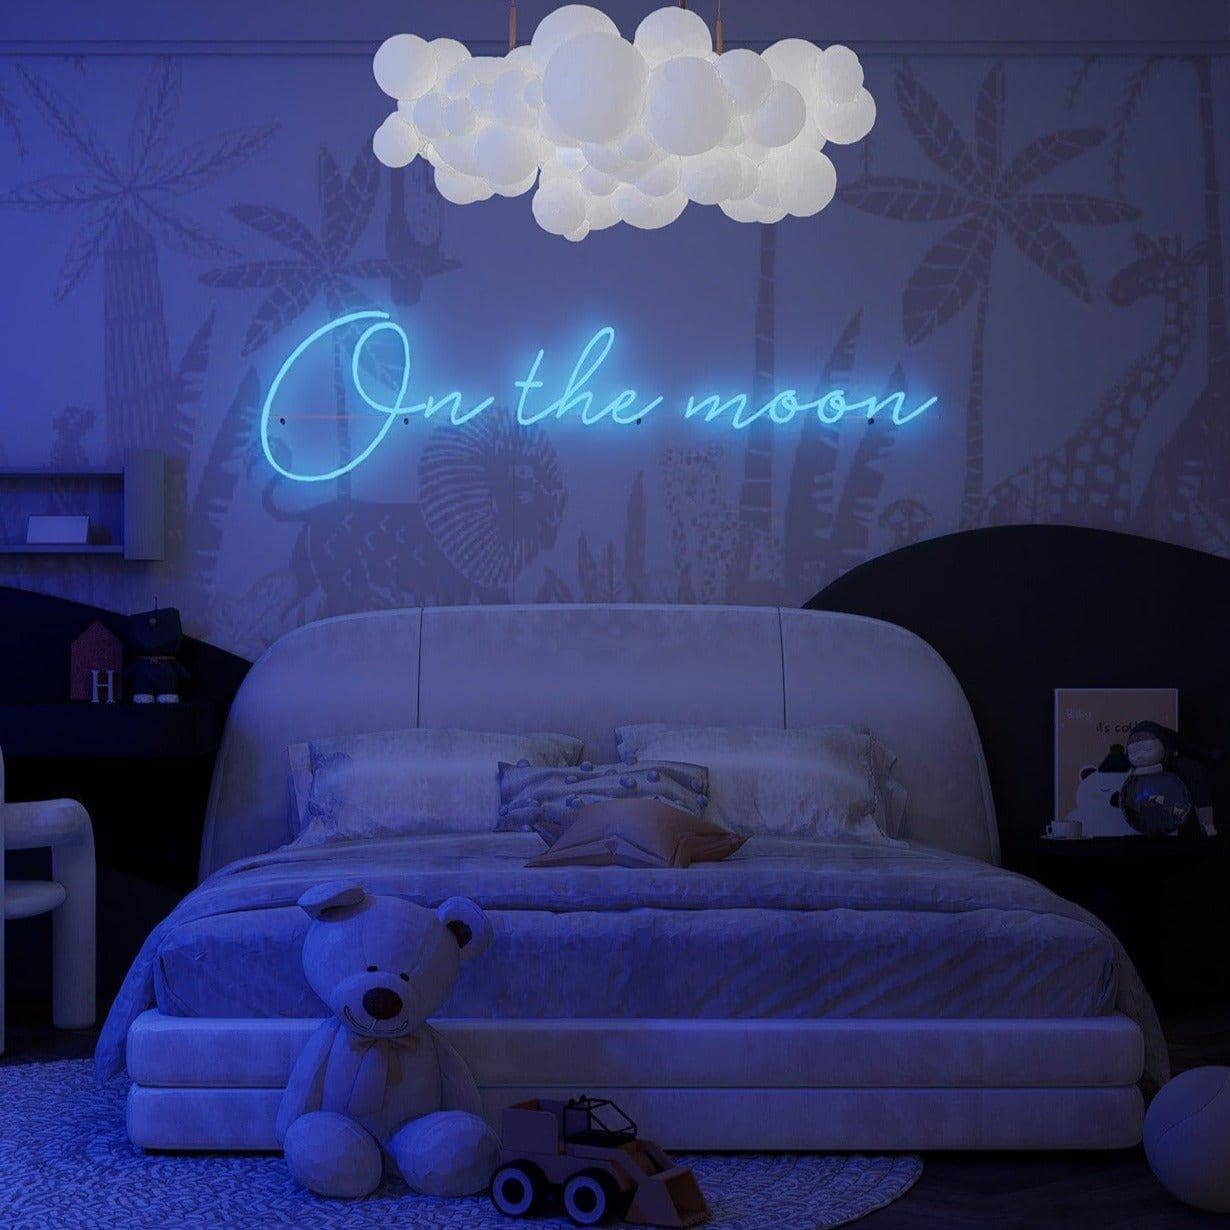 night-shot-of-lit-blue-neon-lights-hanging-on-display-in-bedroom-on-the-moon